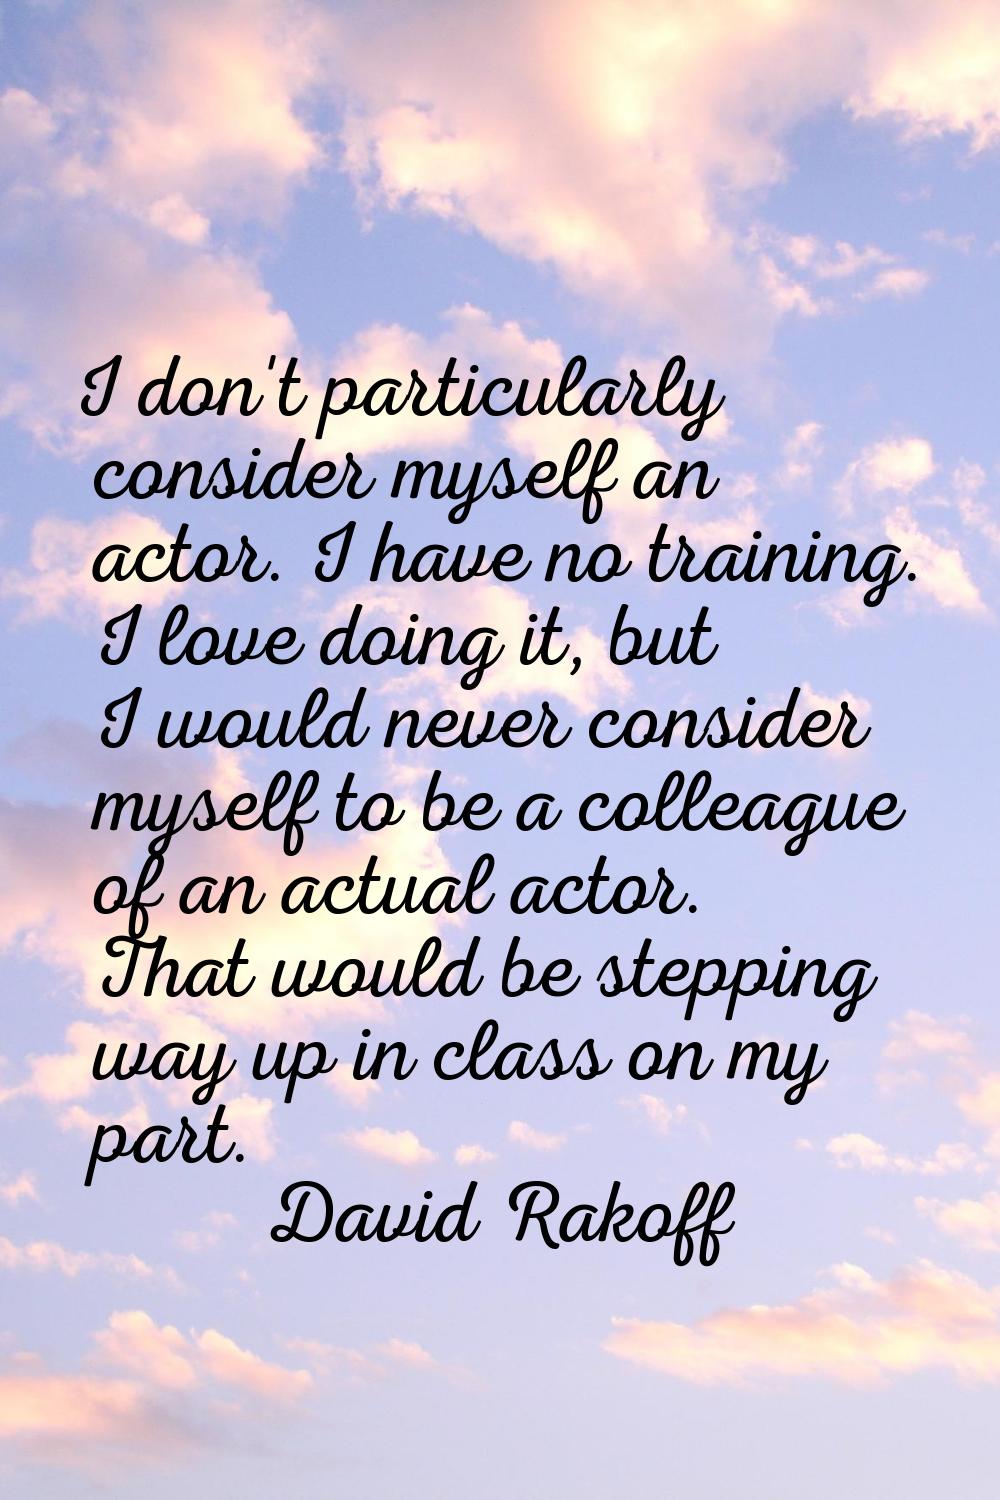 I don't particularly consider myself an actor. I have no training. I love doing it, but I would nev